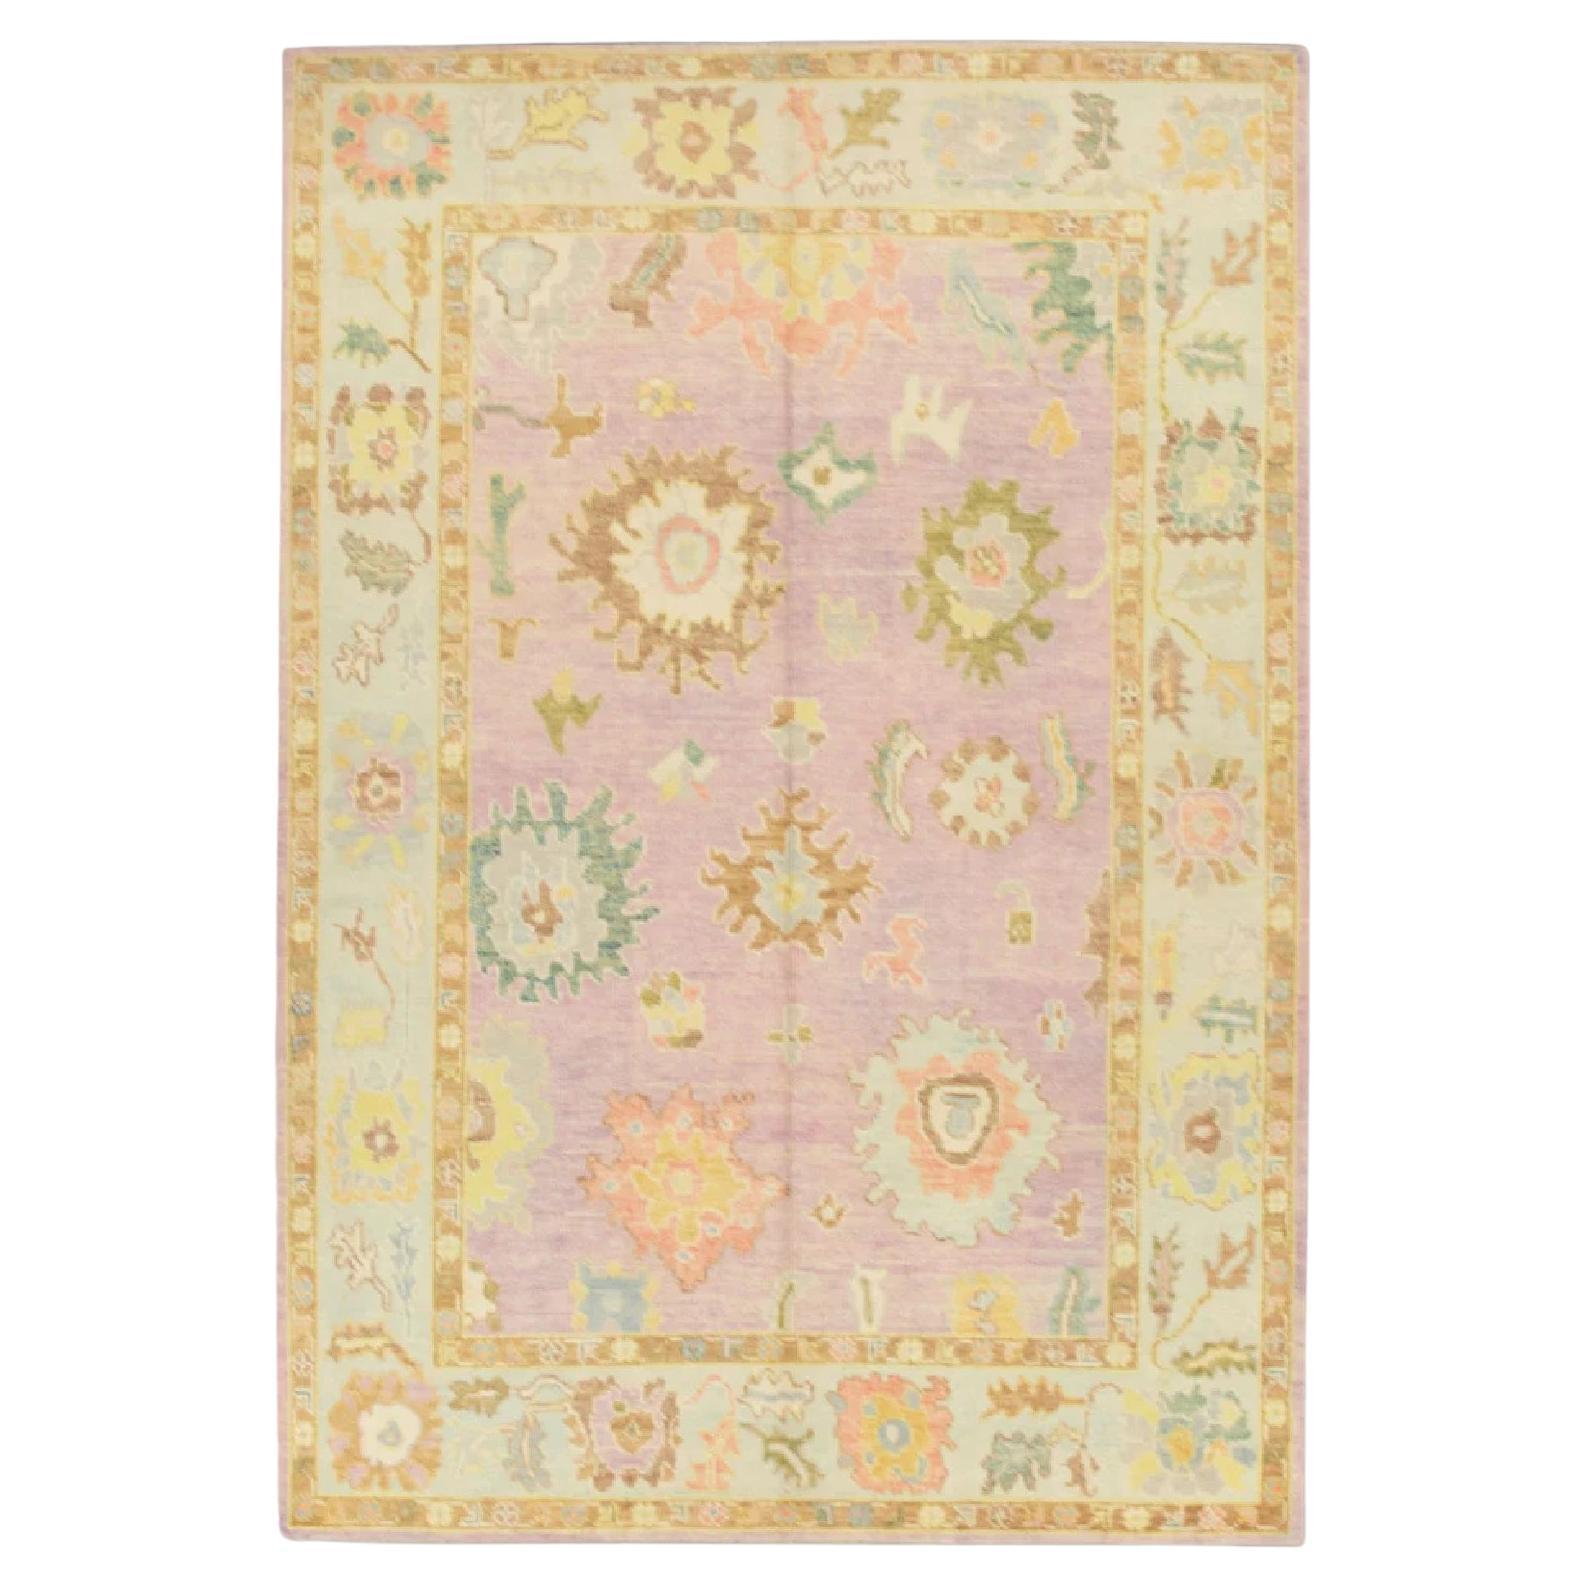 Pink Floral Handwoven Wool Turkish Oushak Rug 6'3" x 9' For Sale